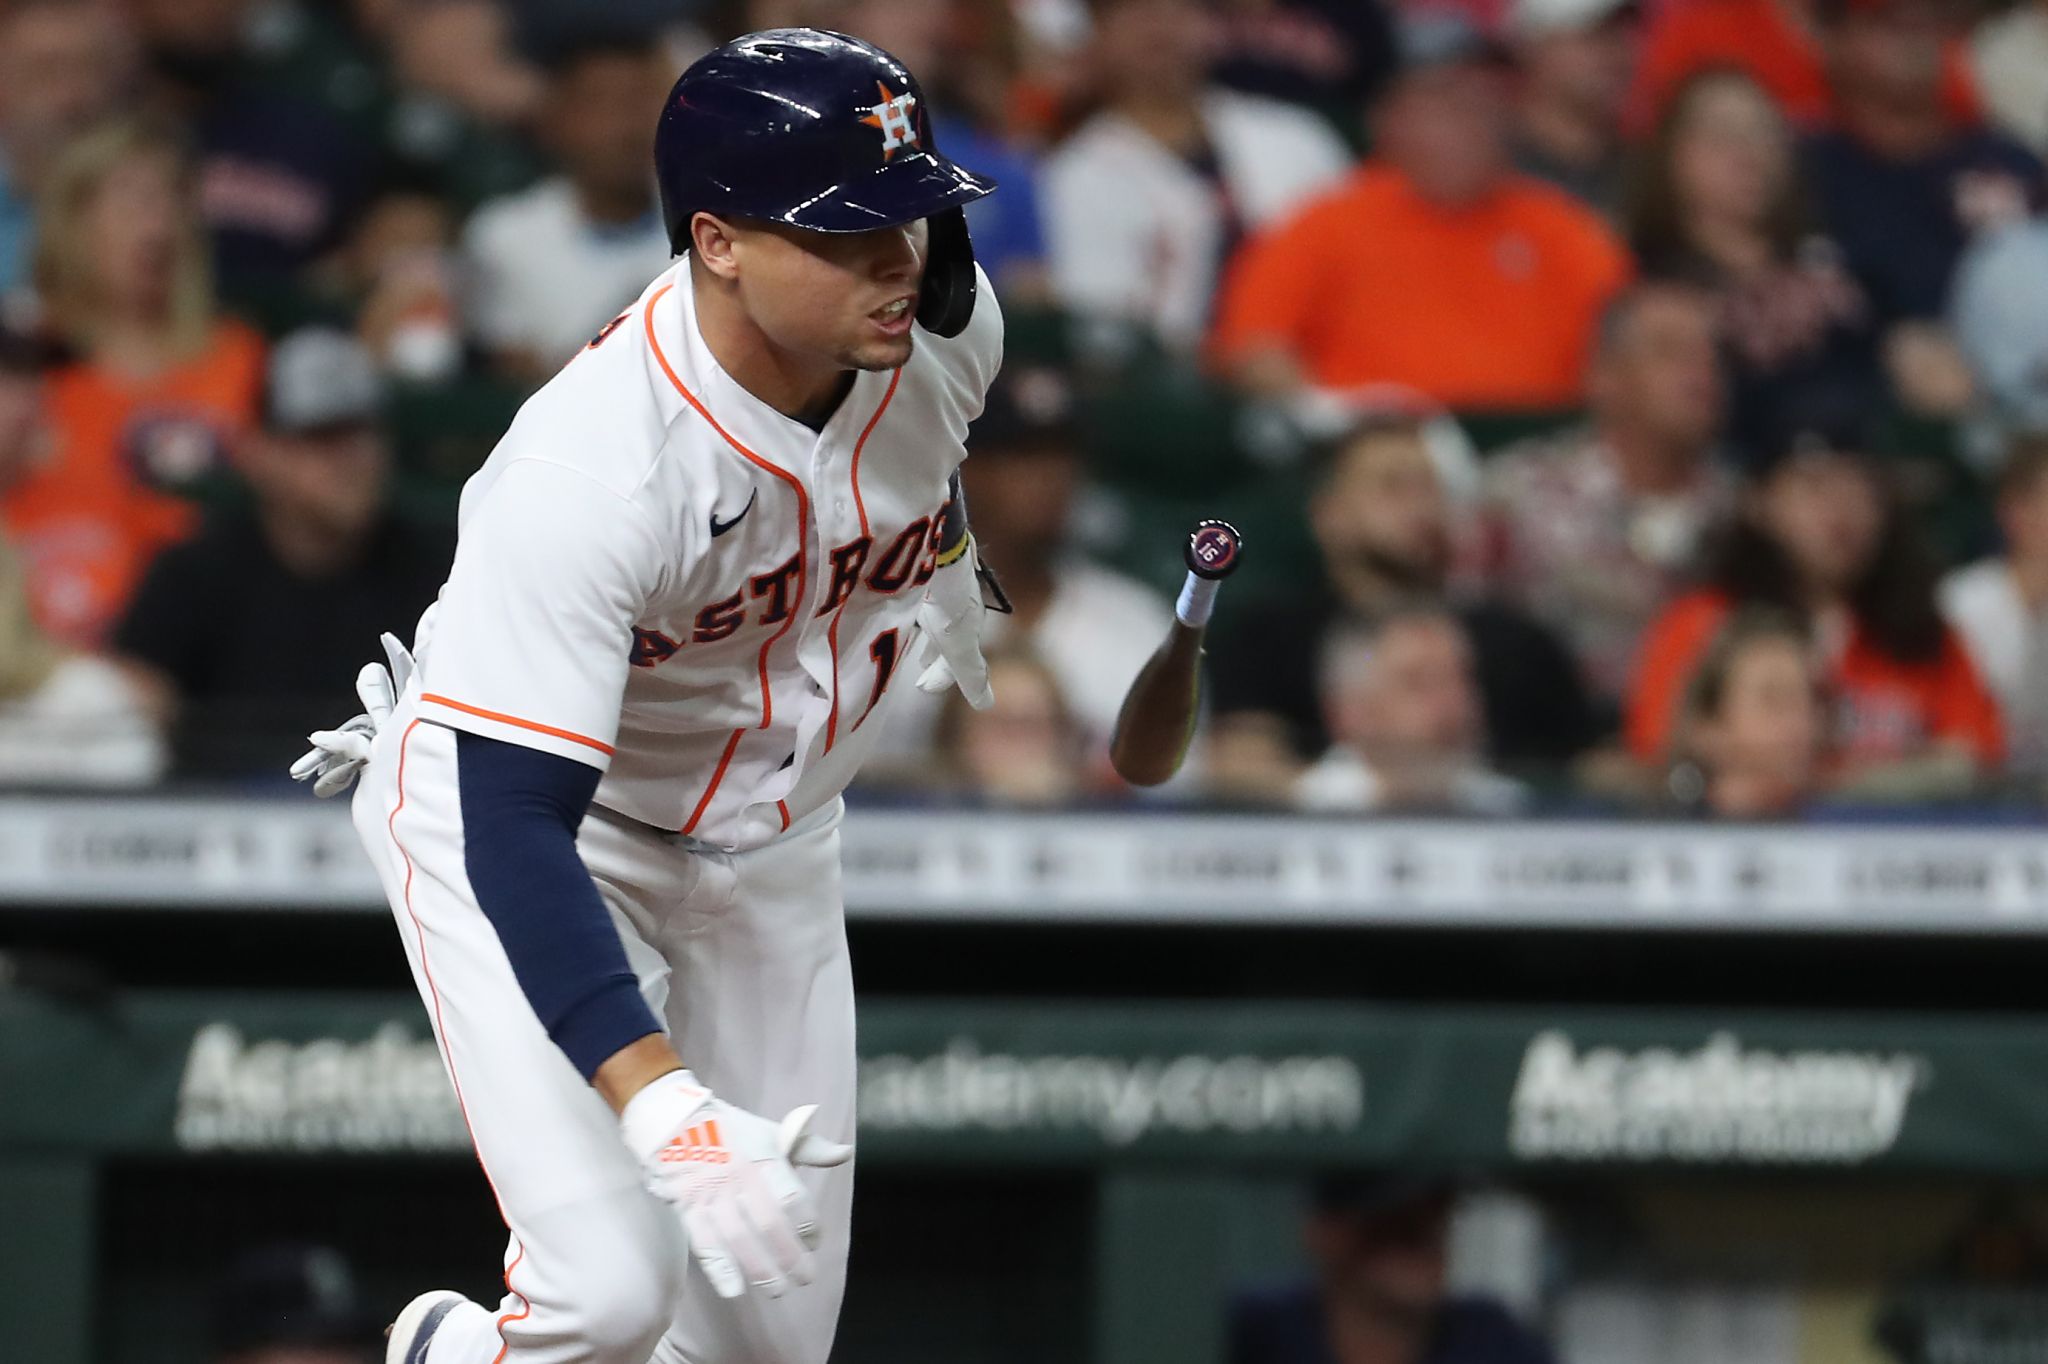 Astros and the arbitration process: These are the deals that got done,  those that didn't and what's next